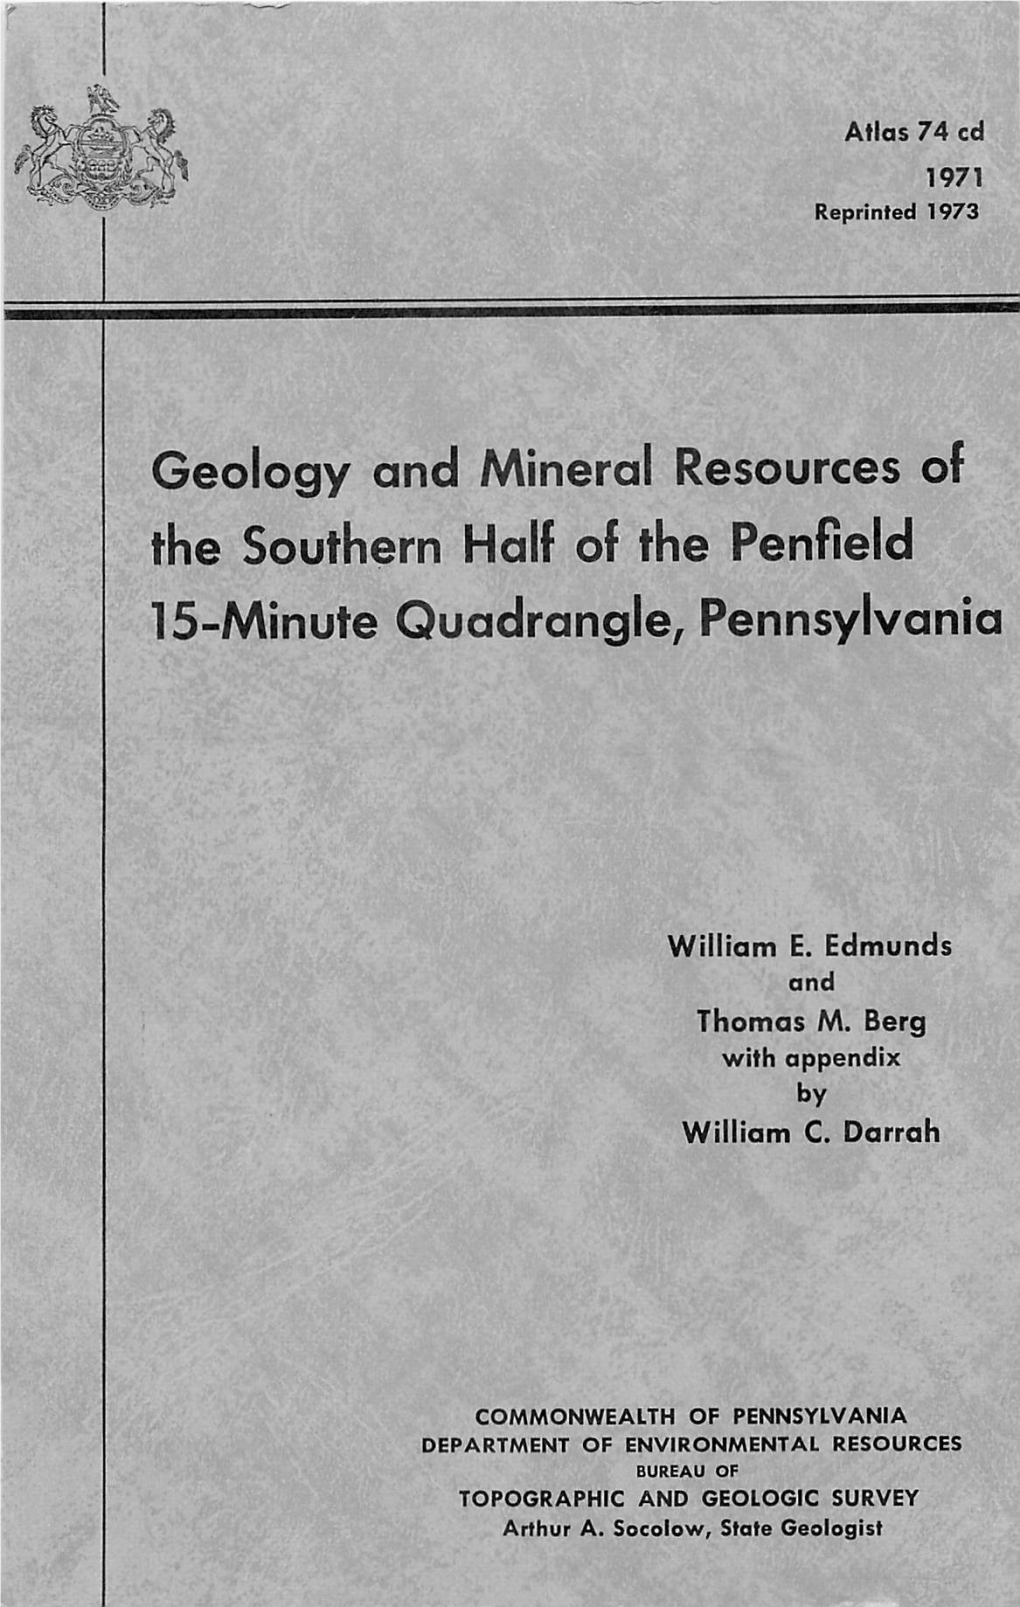 Geology and Mineral Resources of the Southern Half of the Penfield 15-Minute Quadrangle, Pennsylvania